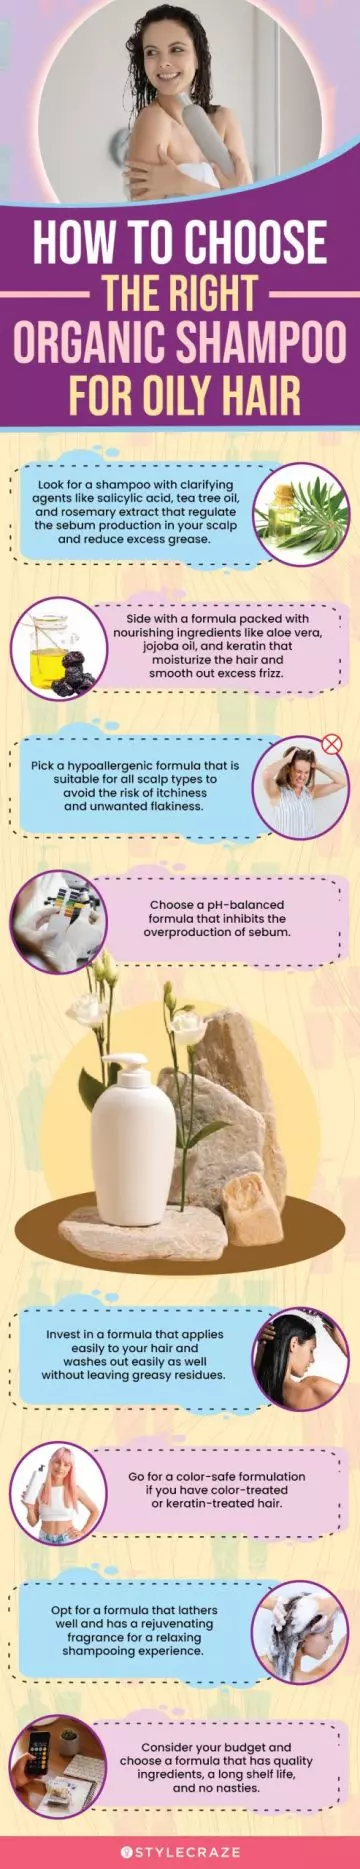 How To Choose The Right Organic Shampoo For Oily Hair (infographic)